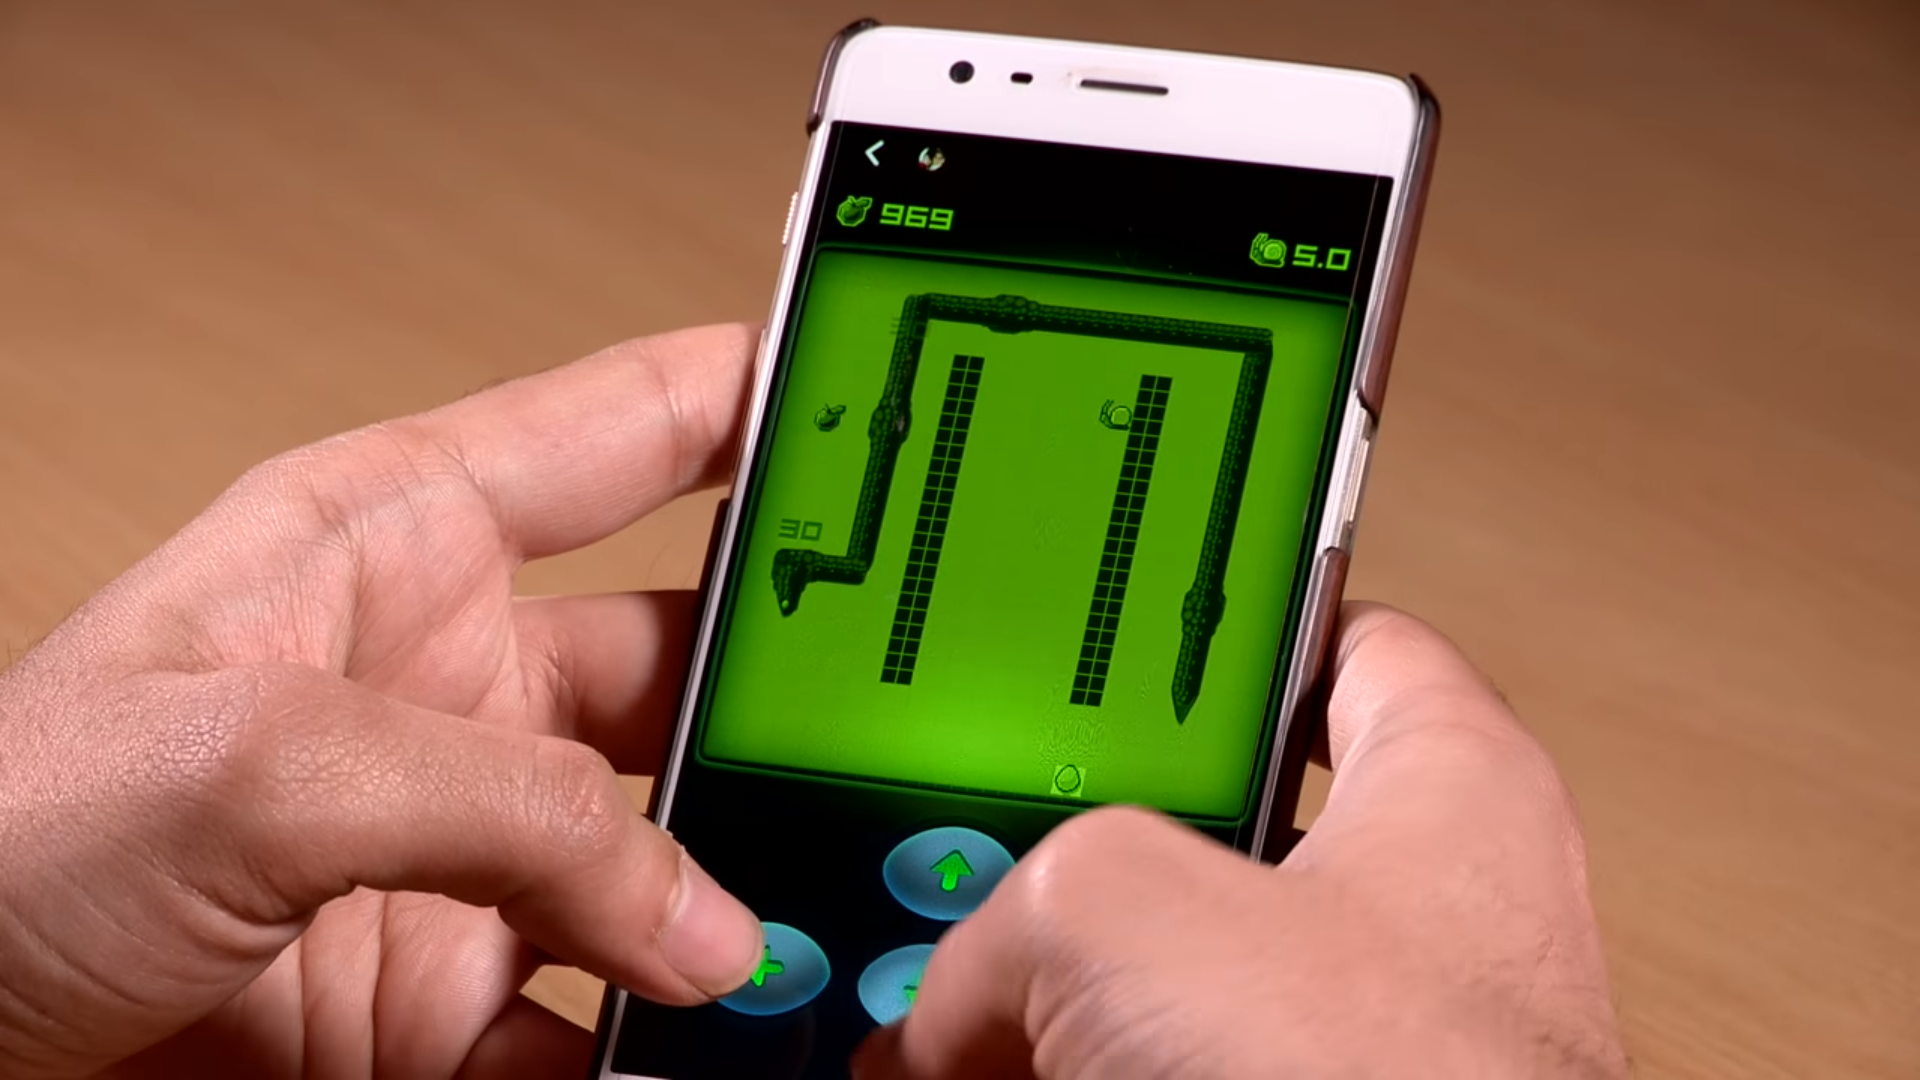 How to Play the New Nokia Snake Game (3310 fame) on FB Messenger